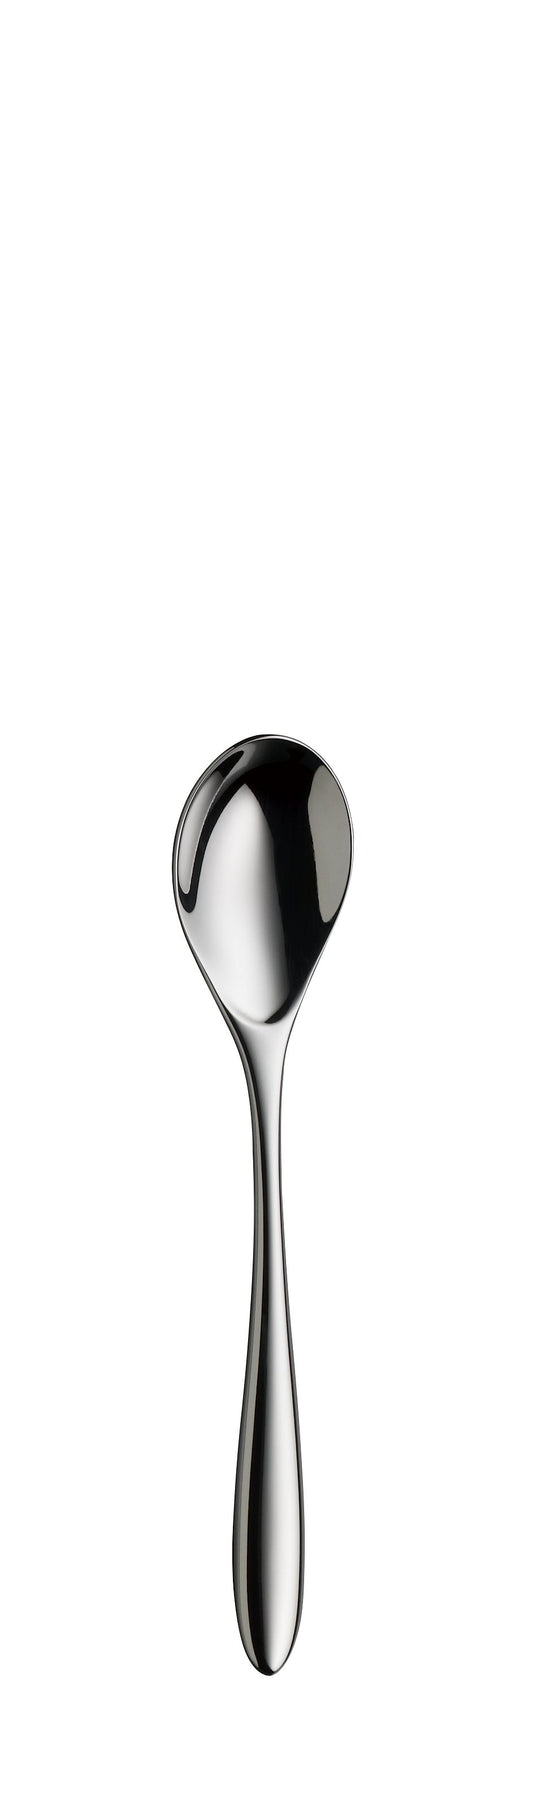 Coffee spoon AVES silverplated 136mm